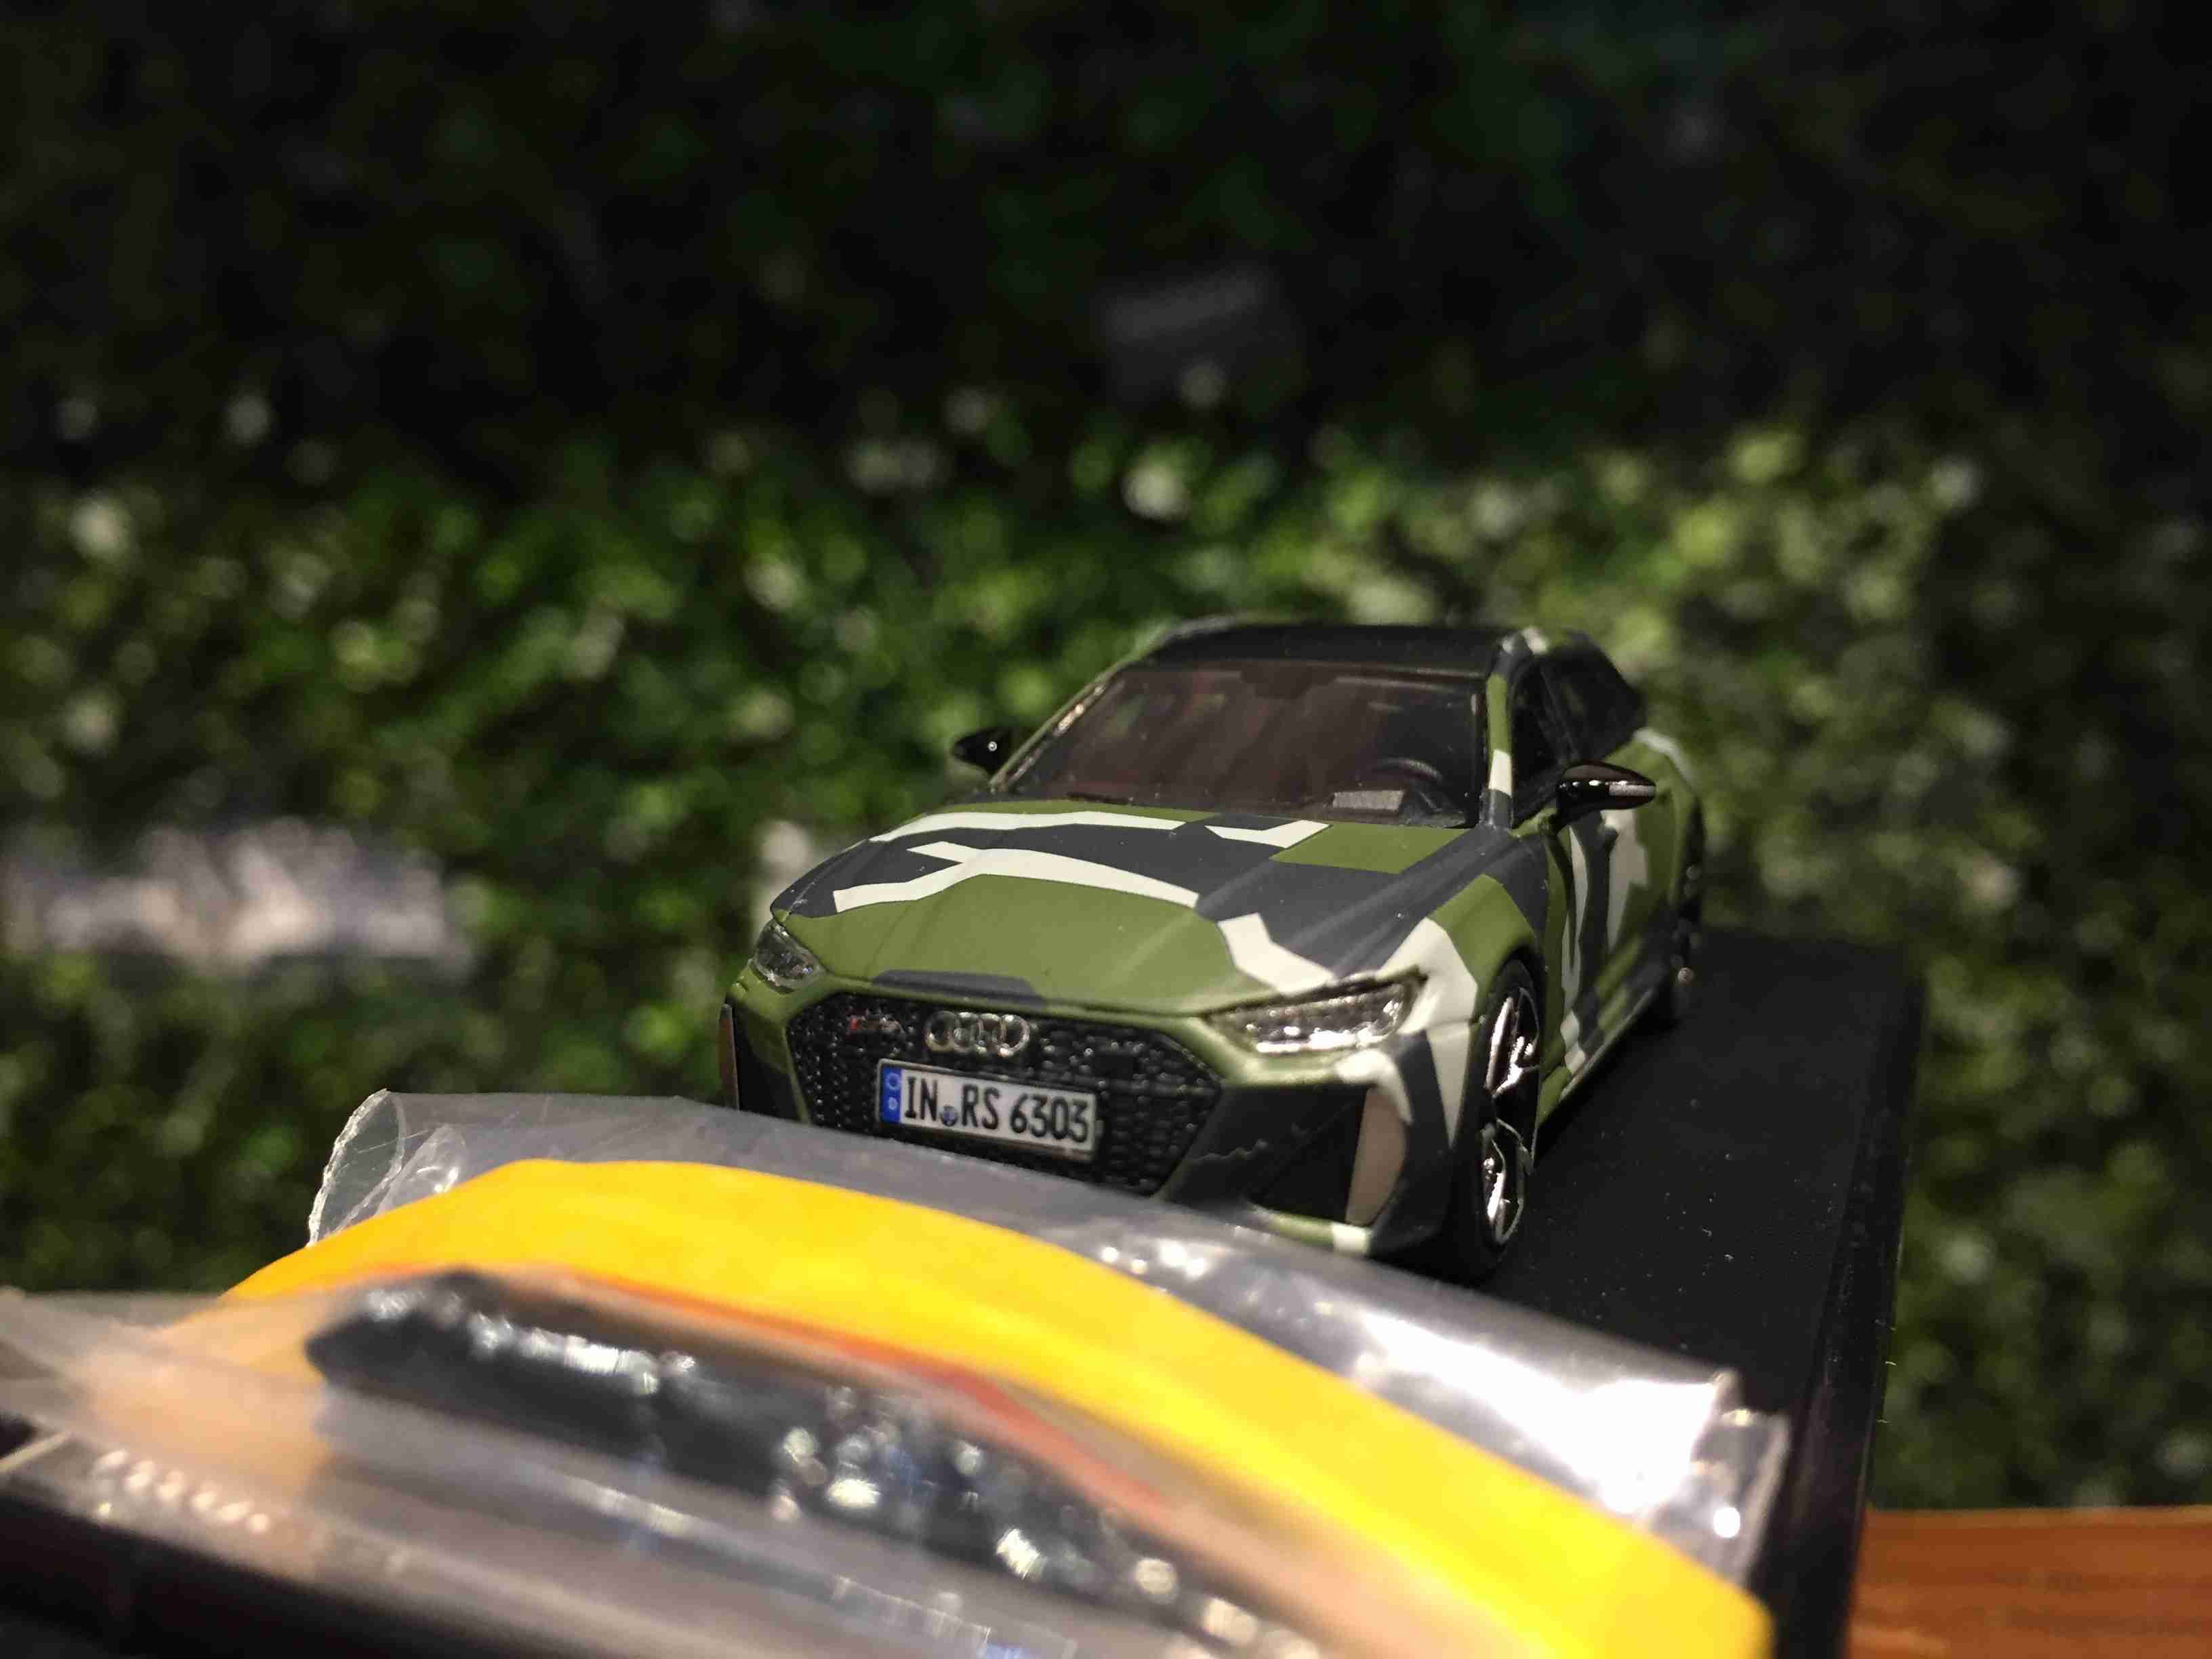 1/64 StanceHunter Audi RS6 Avant (C8) Camouflage【MGM】